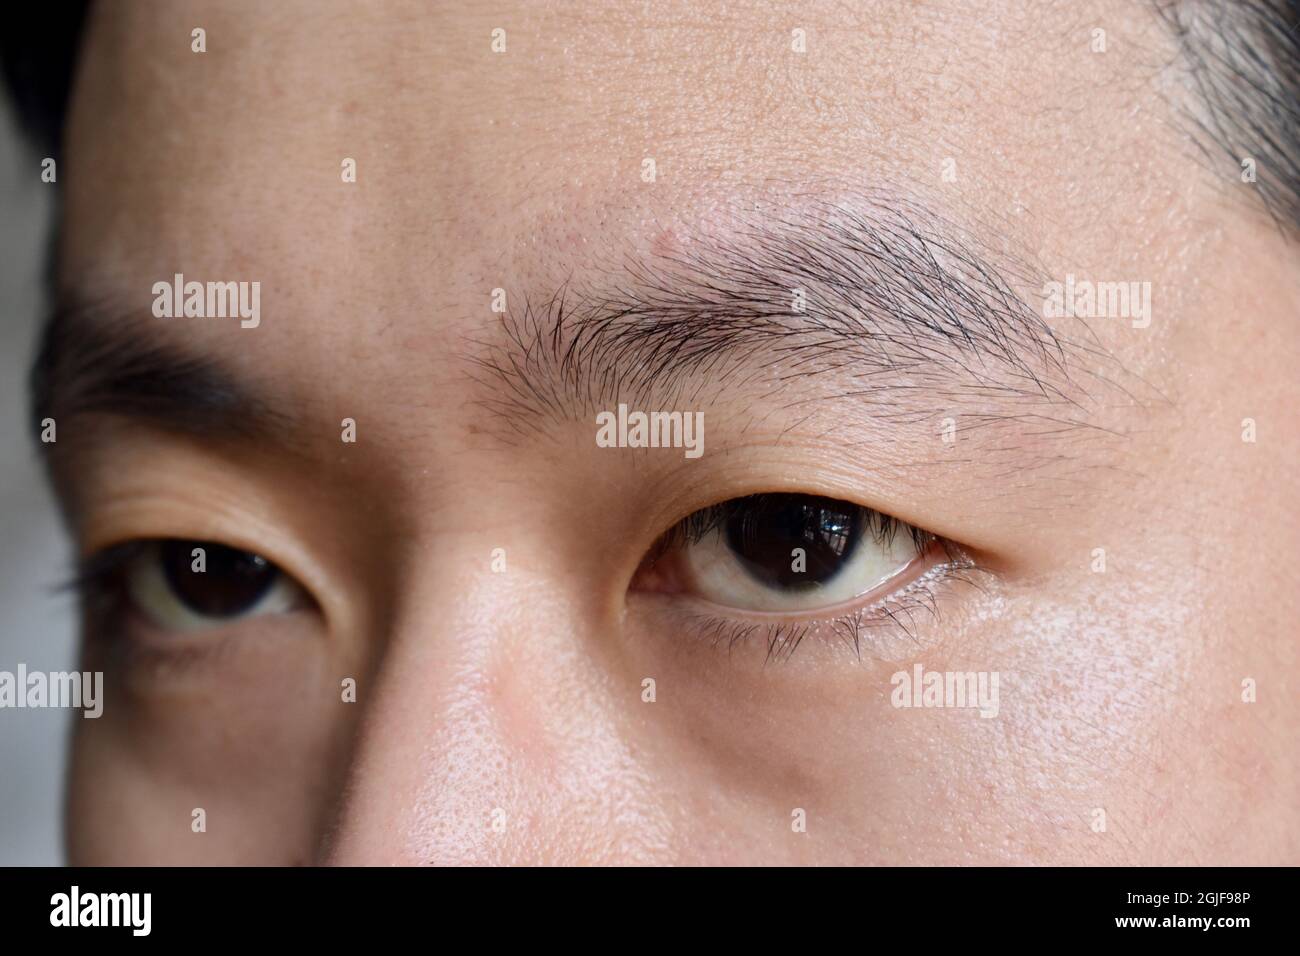 Aging skin folds or skin creases or wrinkles at face especially around eye of Southeast Asian, Chinese man. Closeup view. Stock Photo